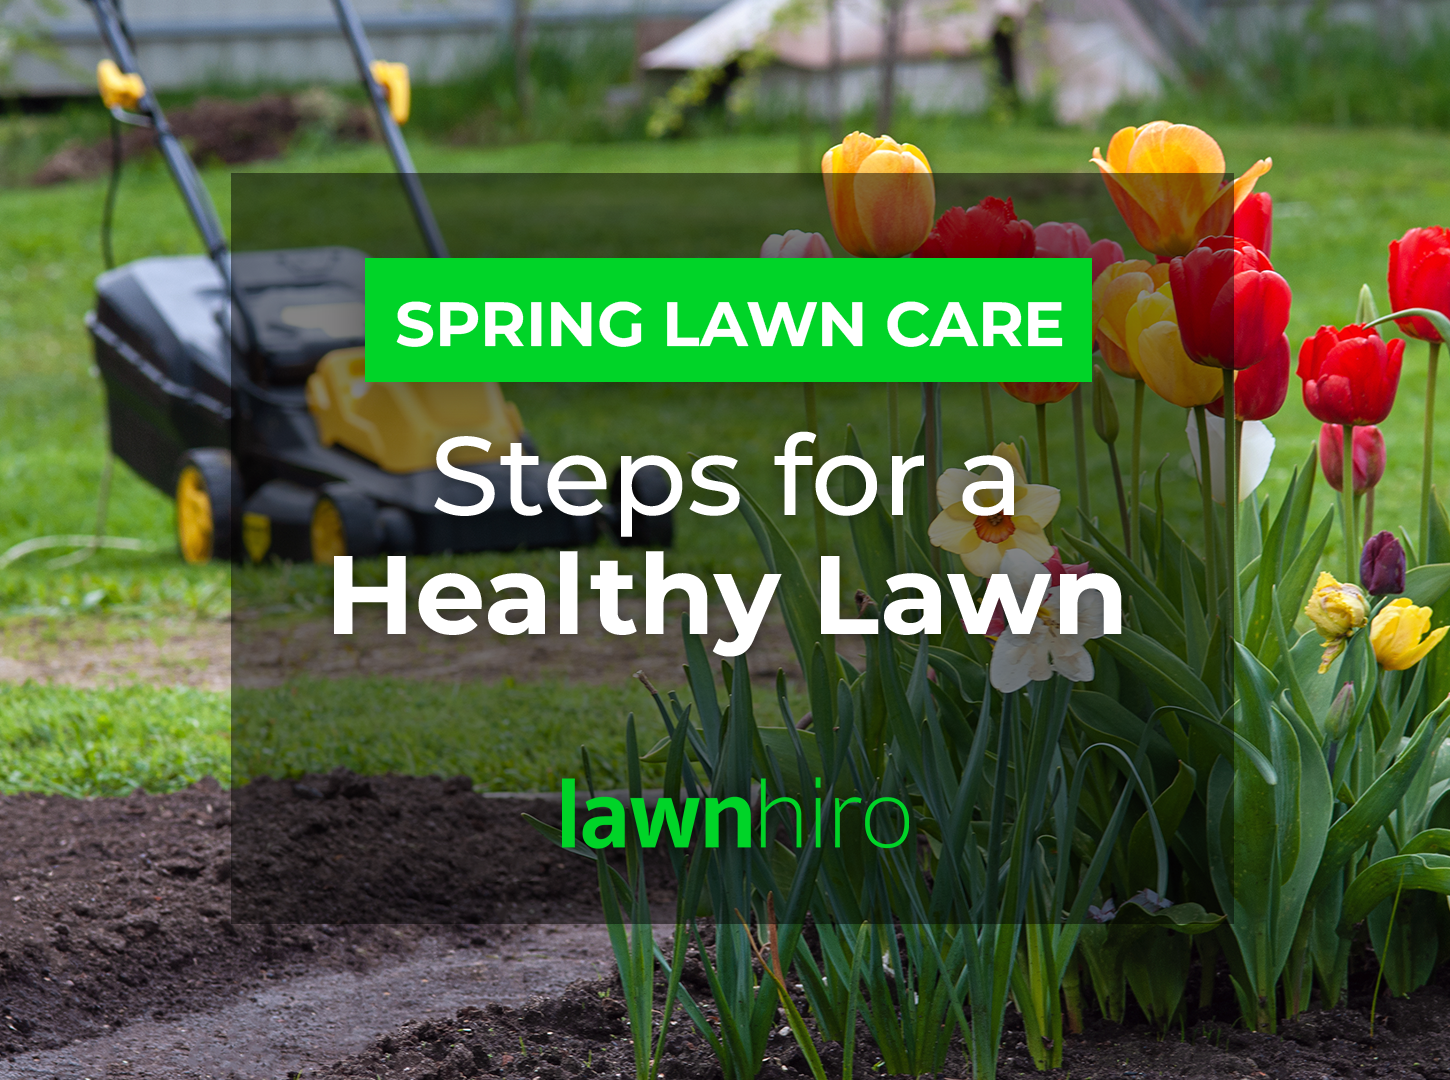 Featured image for “Spring Lawn Care: Steps for a Healthy Lawn”